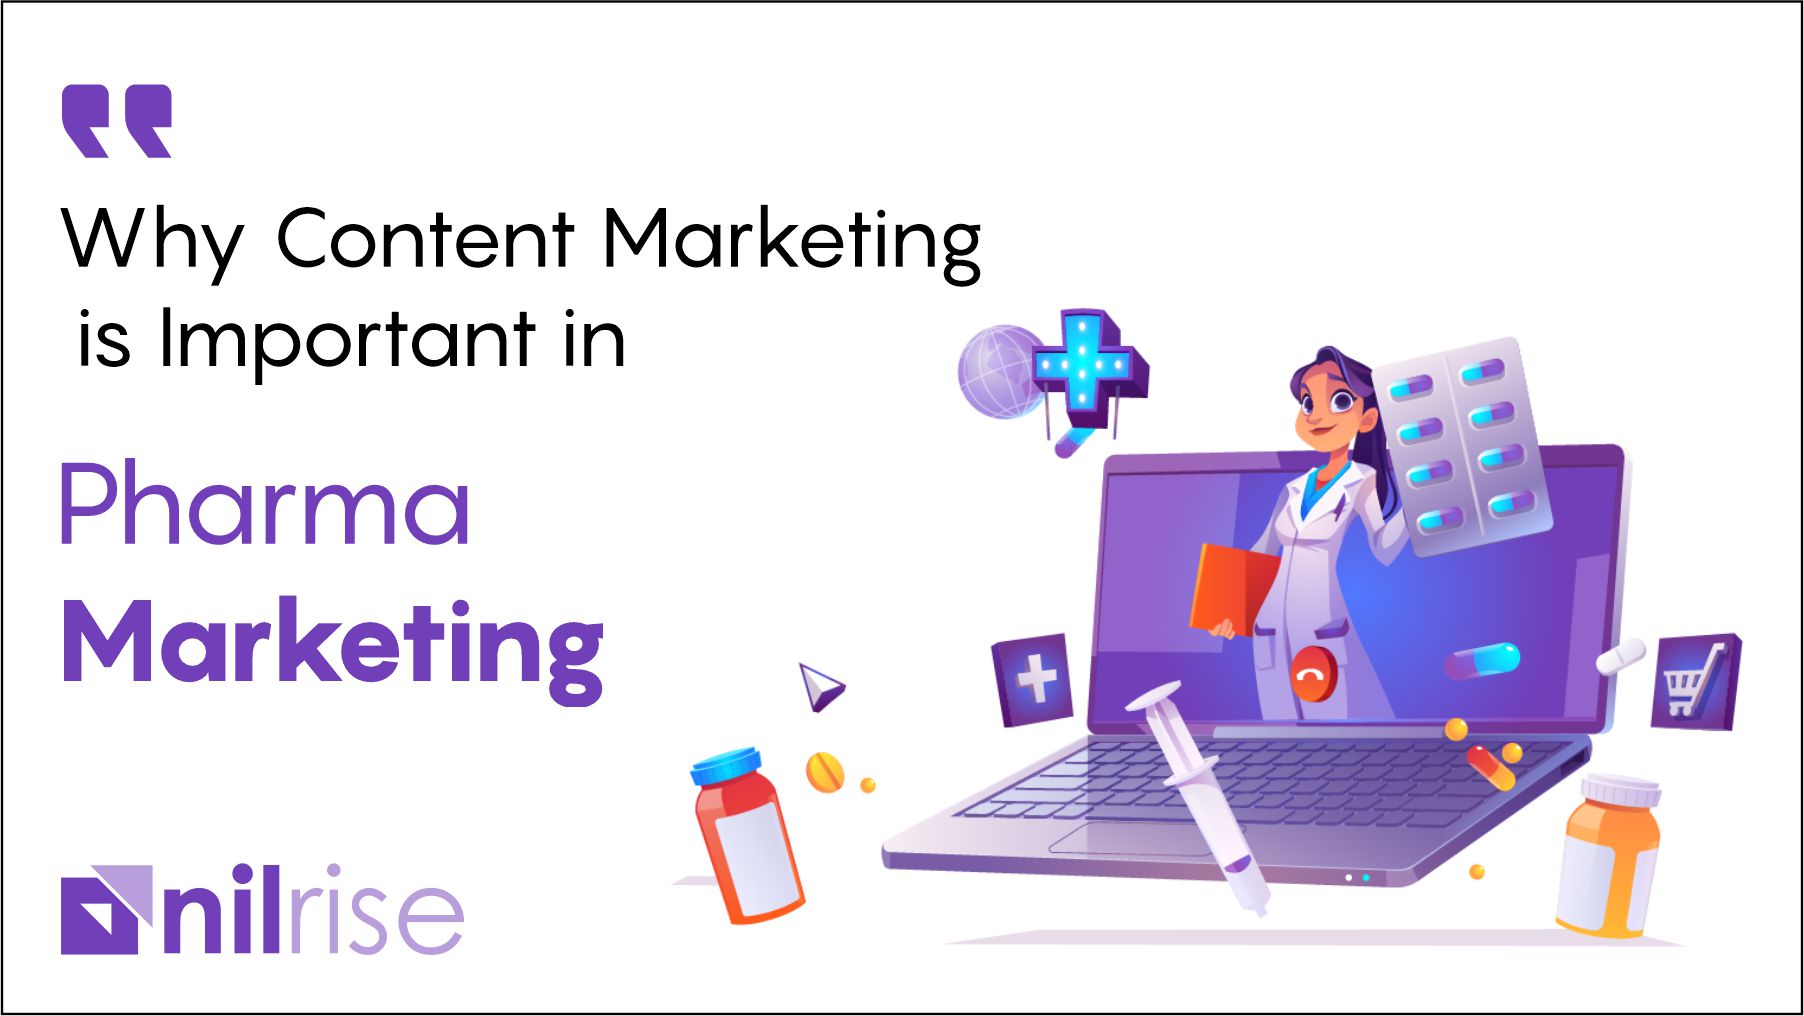 Why content marketing is important in pharma marketing